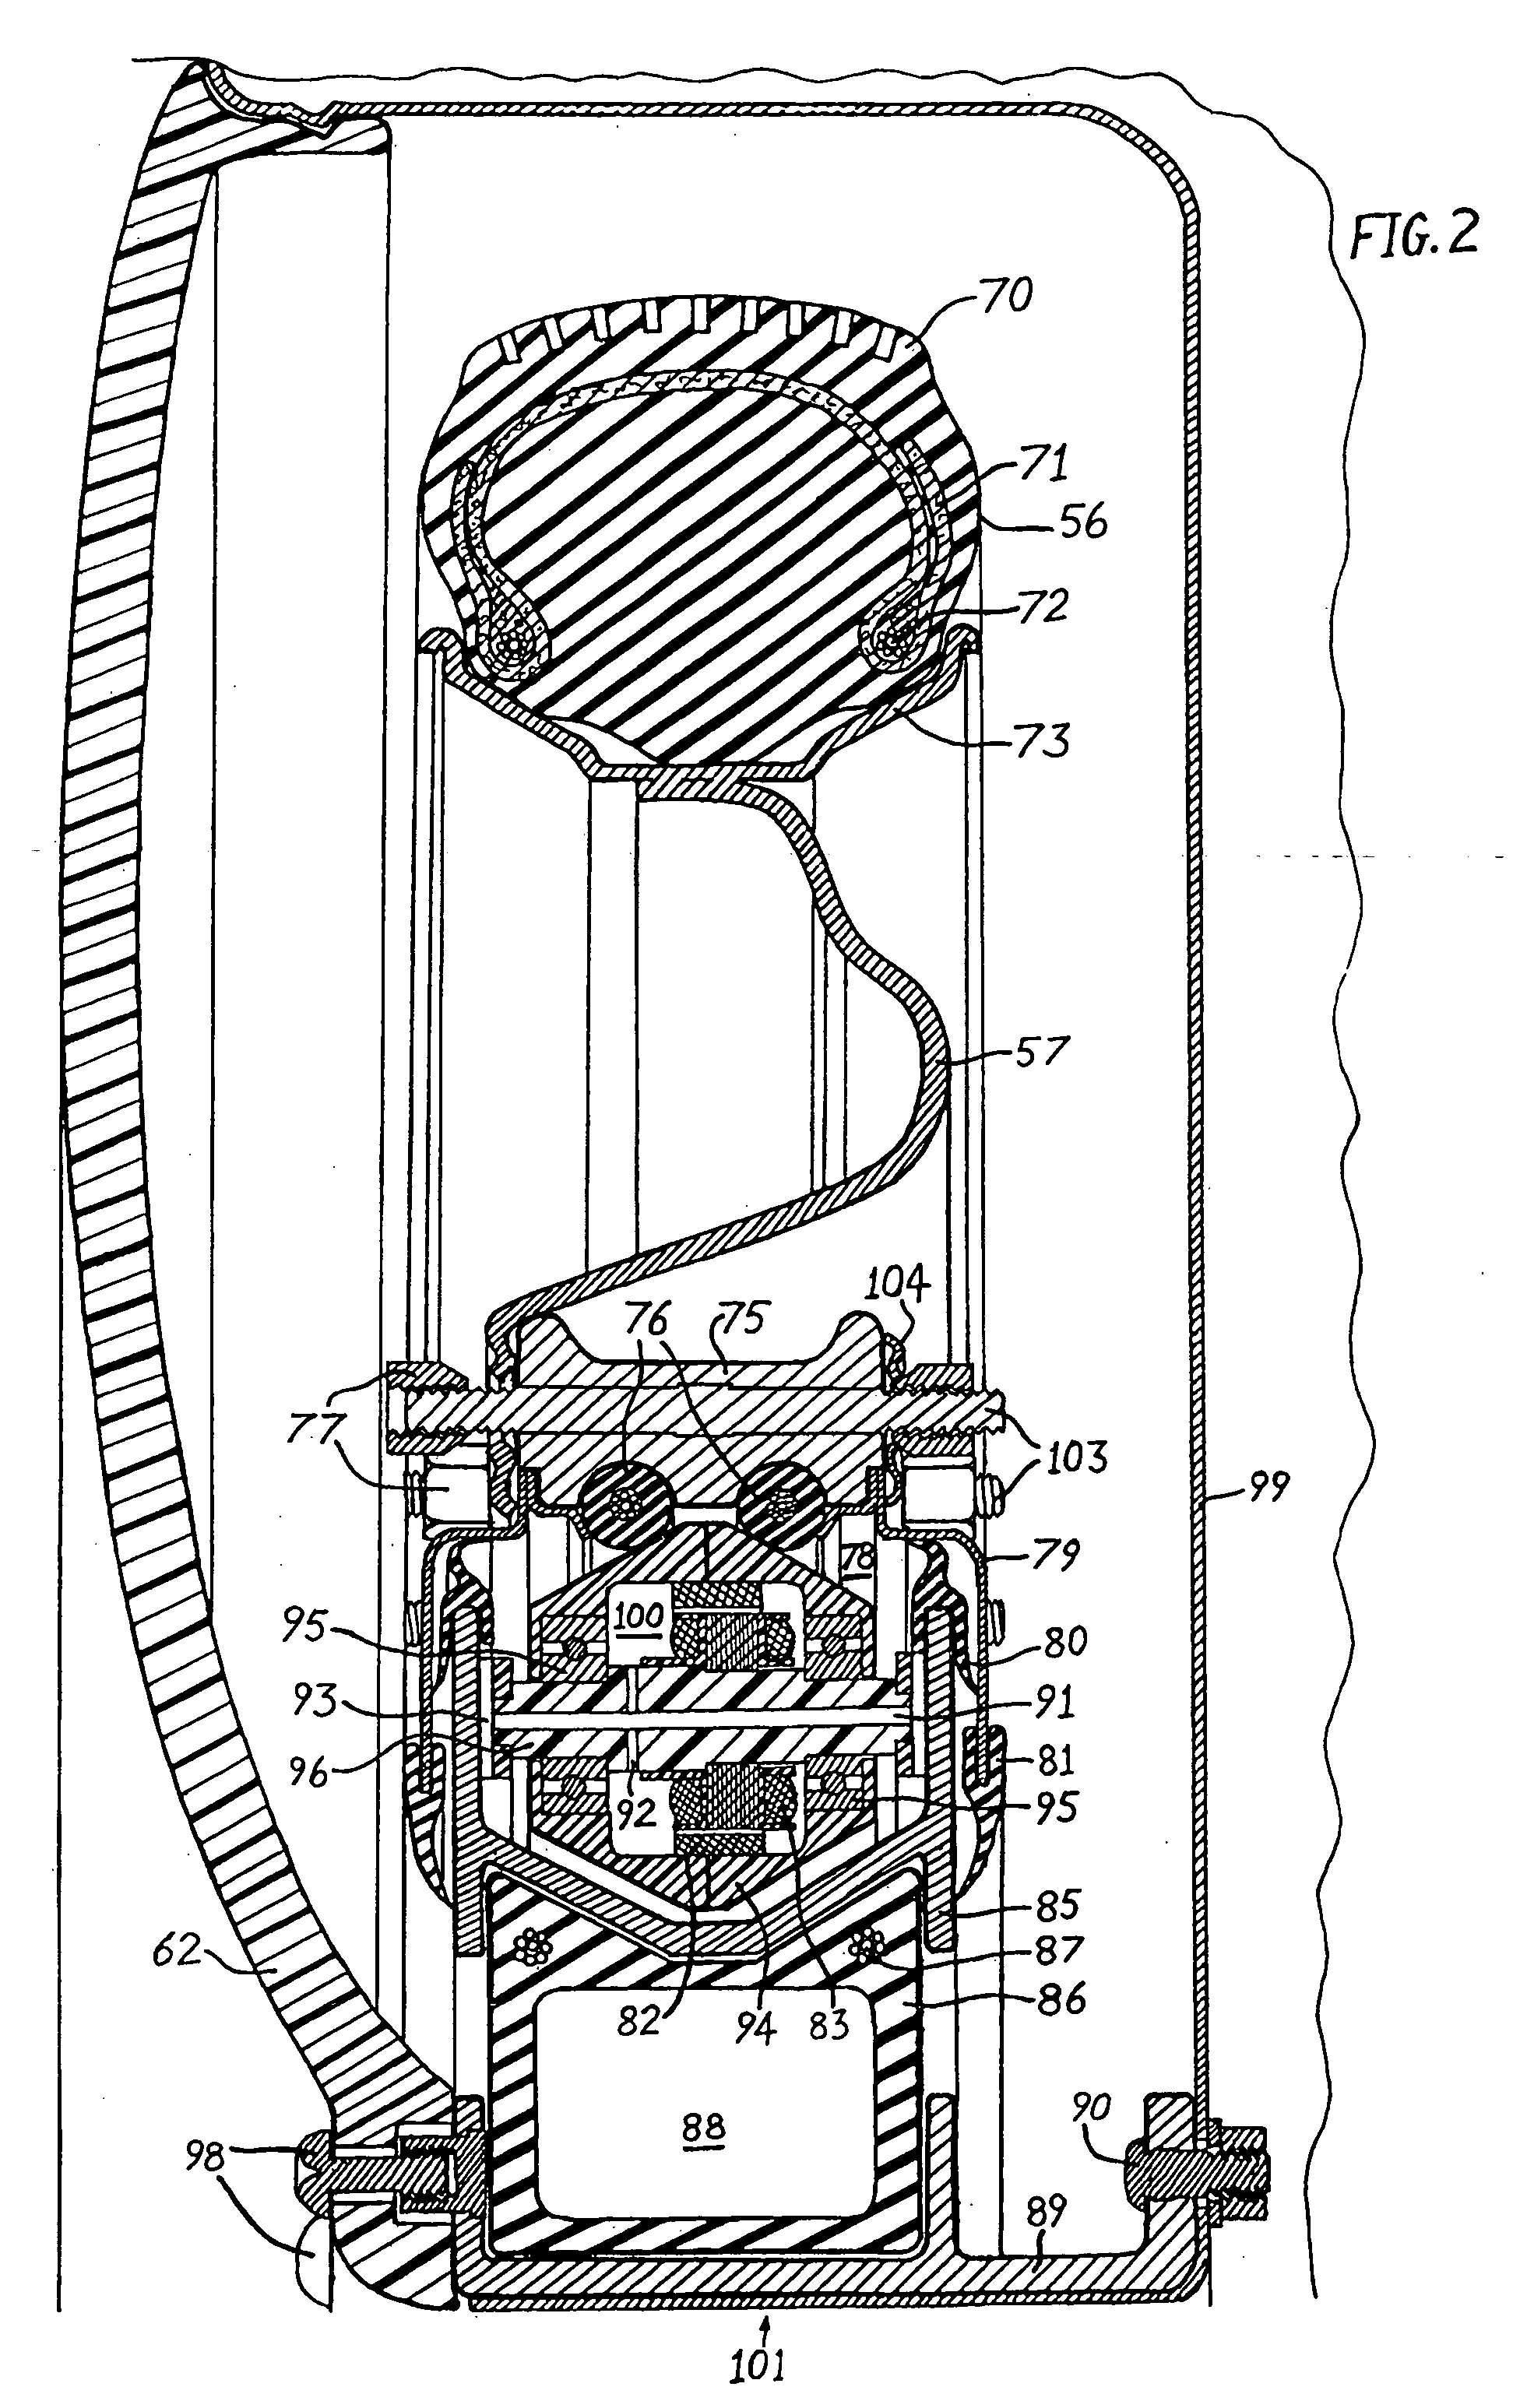 Two-parallel-wheeled electric motor vehicle with a provision for connecting electromagnetic holonomic wheels in tandem